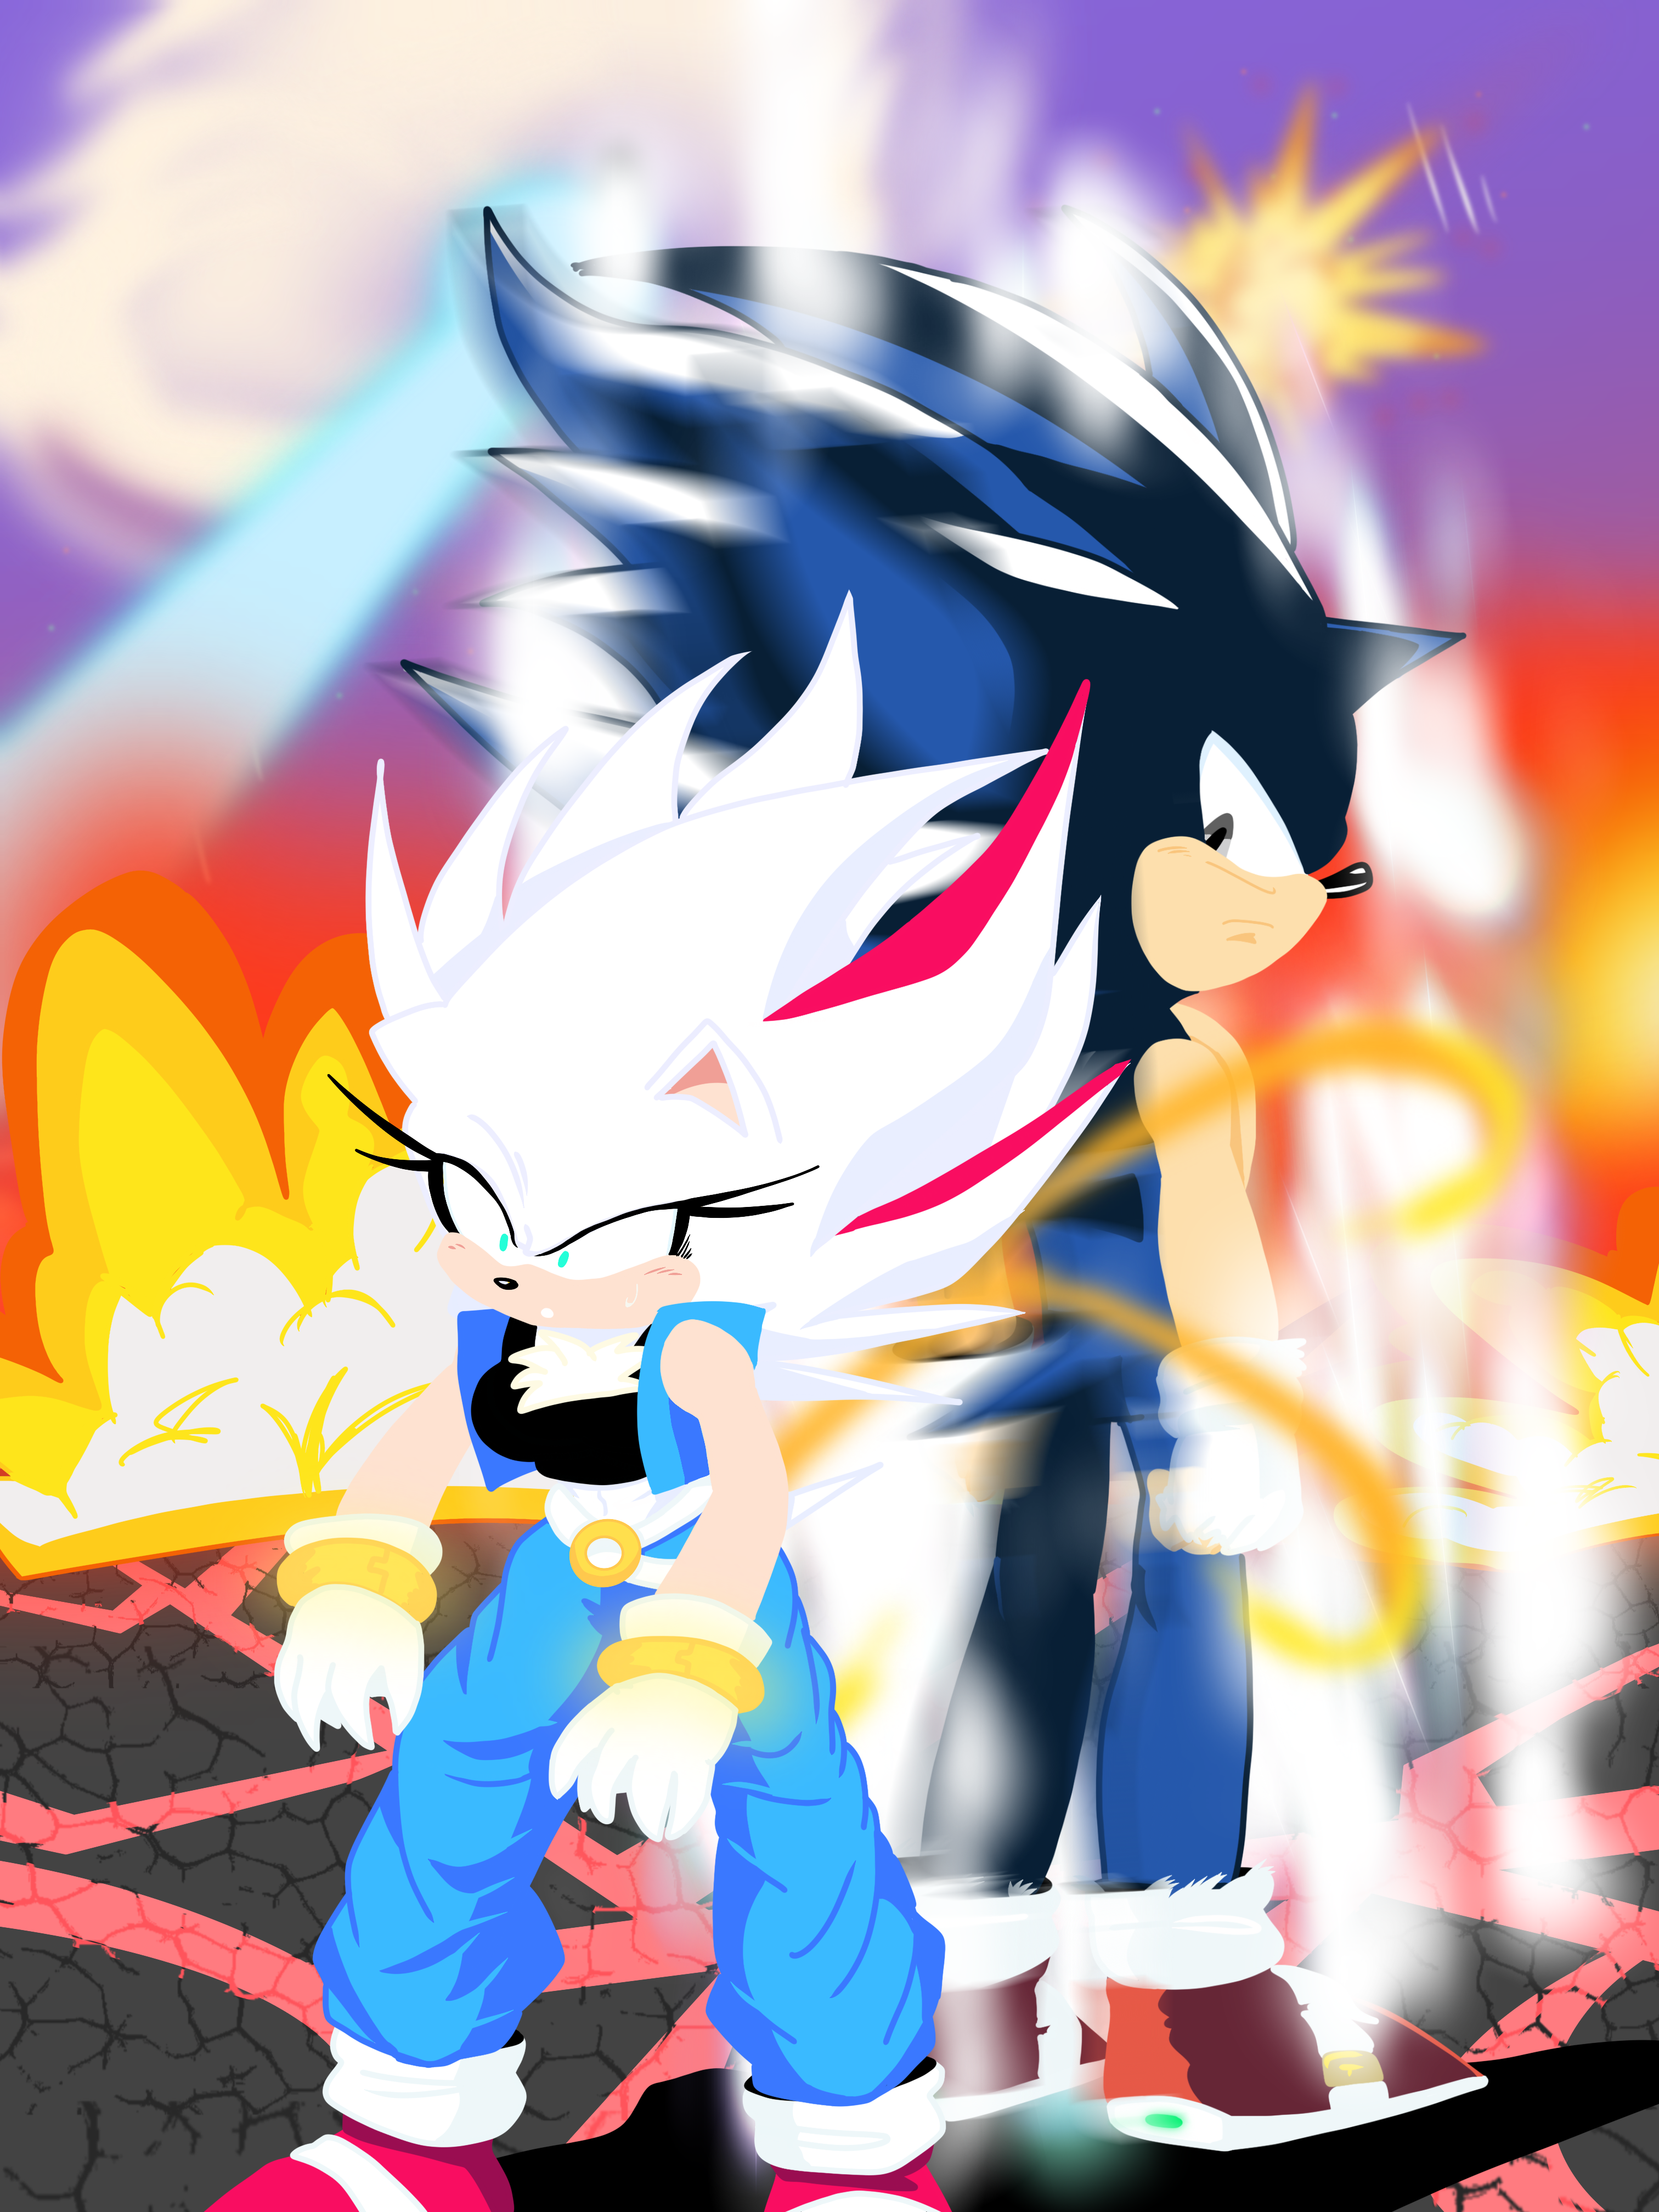 The Rematch. Sonic vs Chaos. Pure chaos remake! by XavTag on